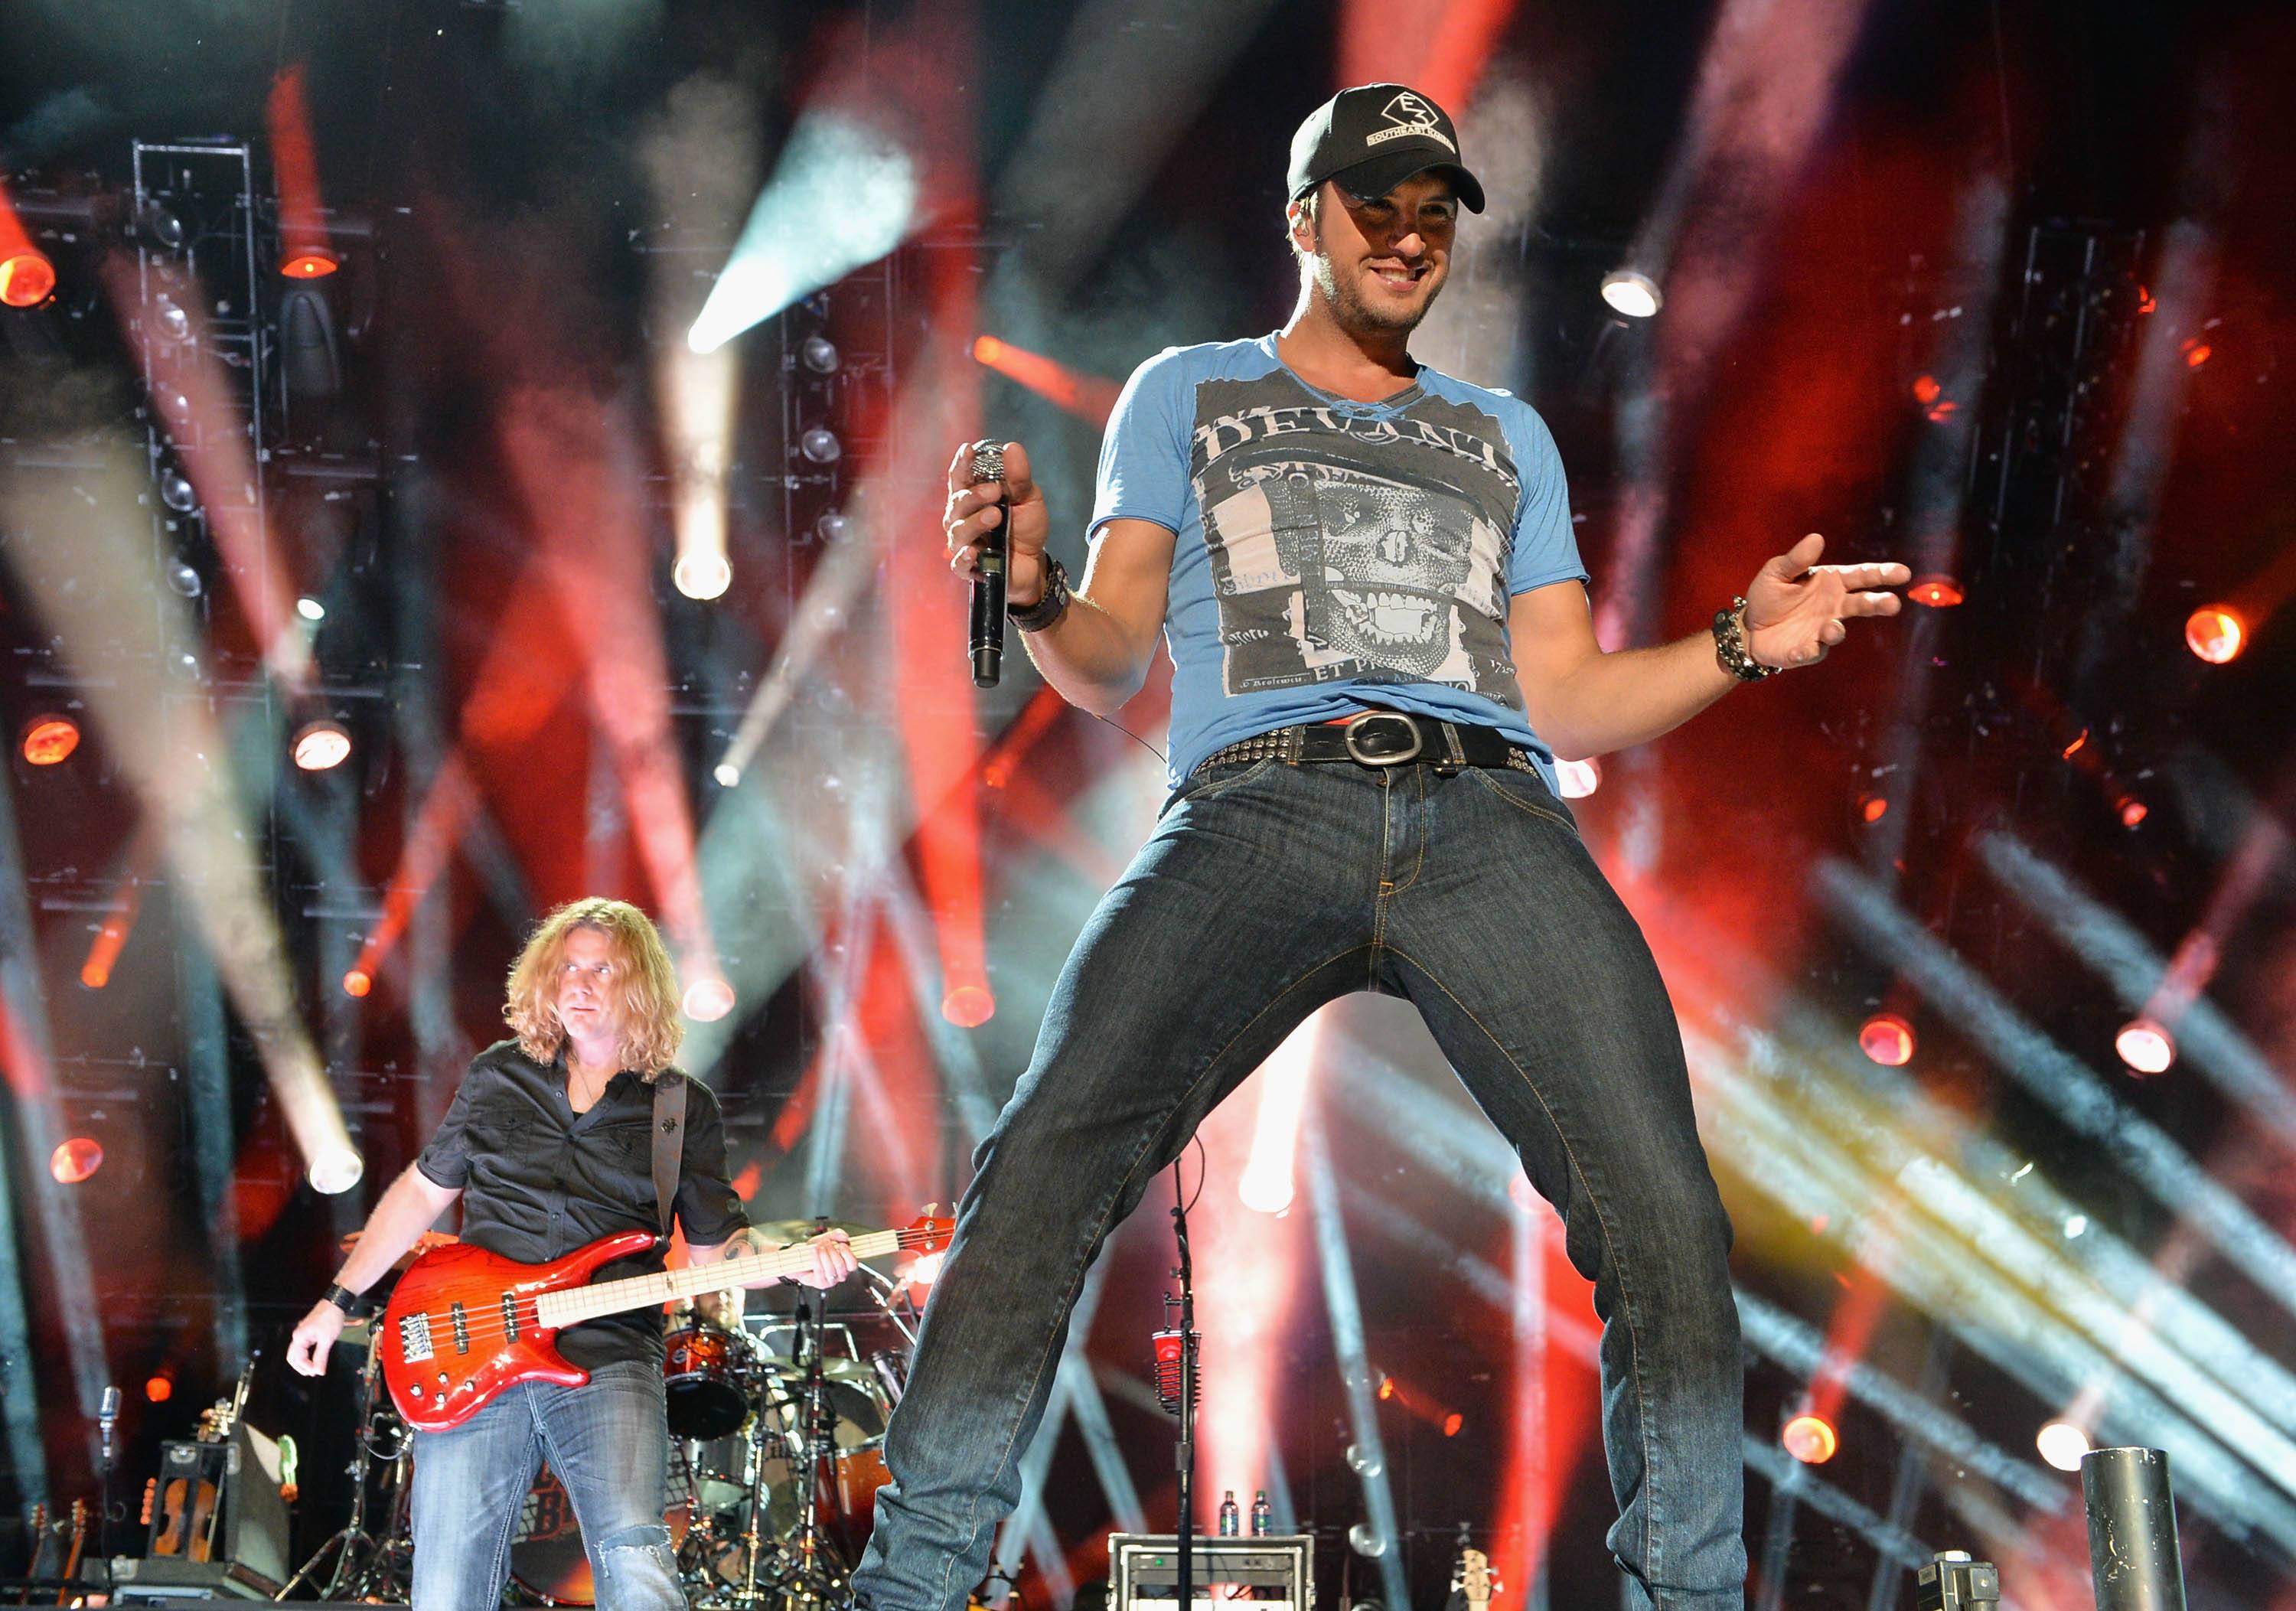 Luke Bryan smiles onstage during a performance.